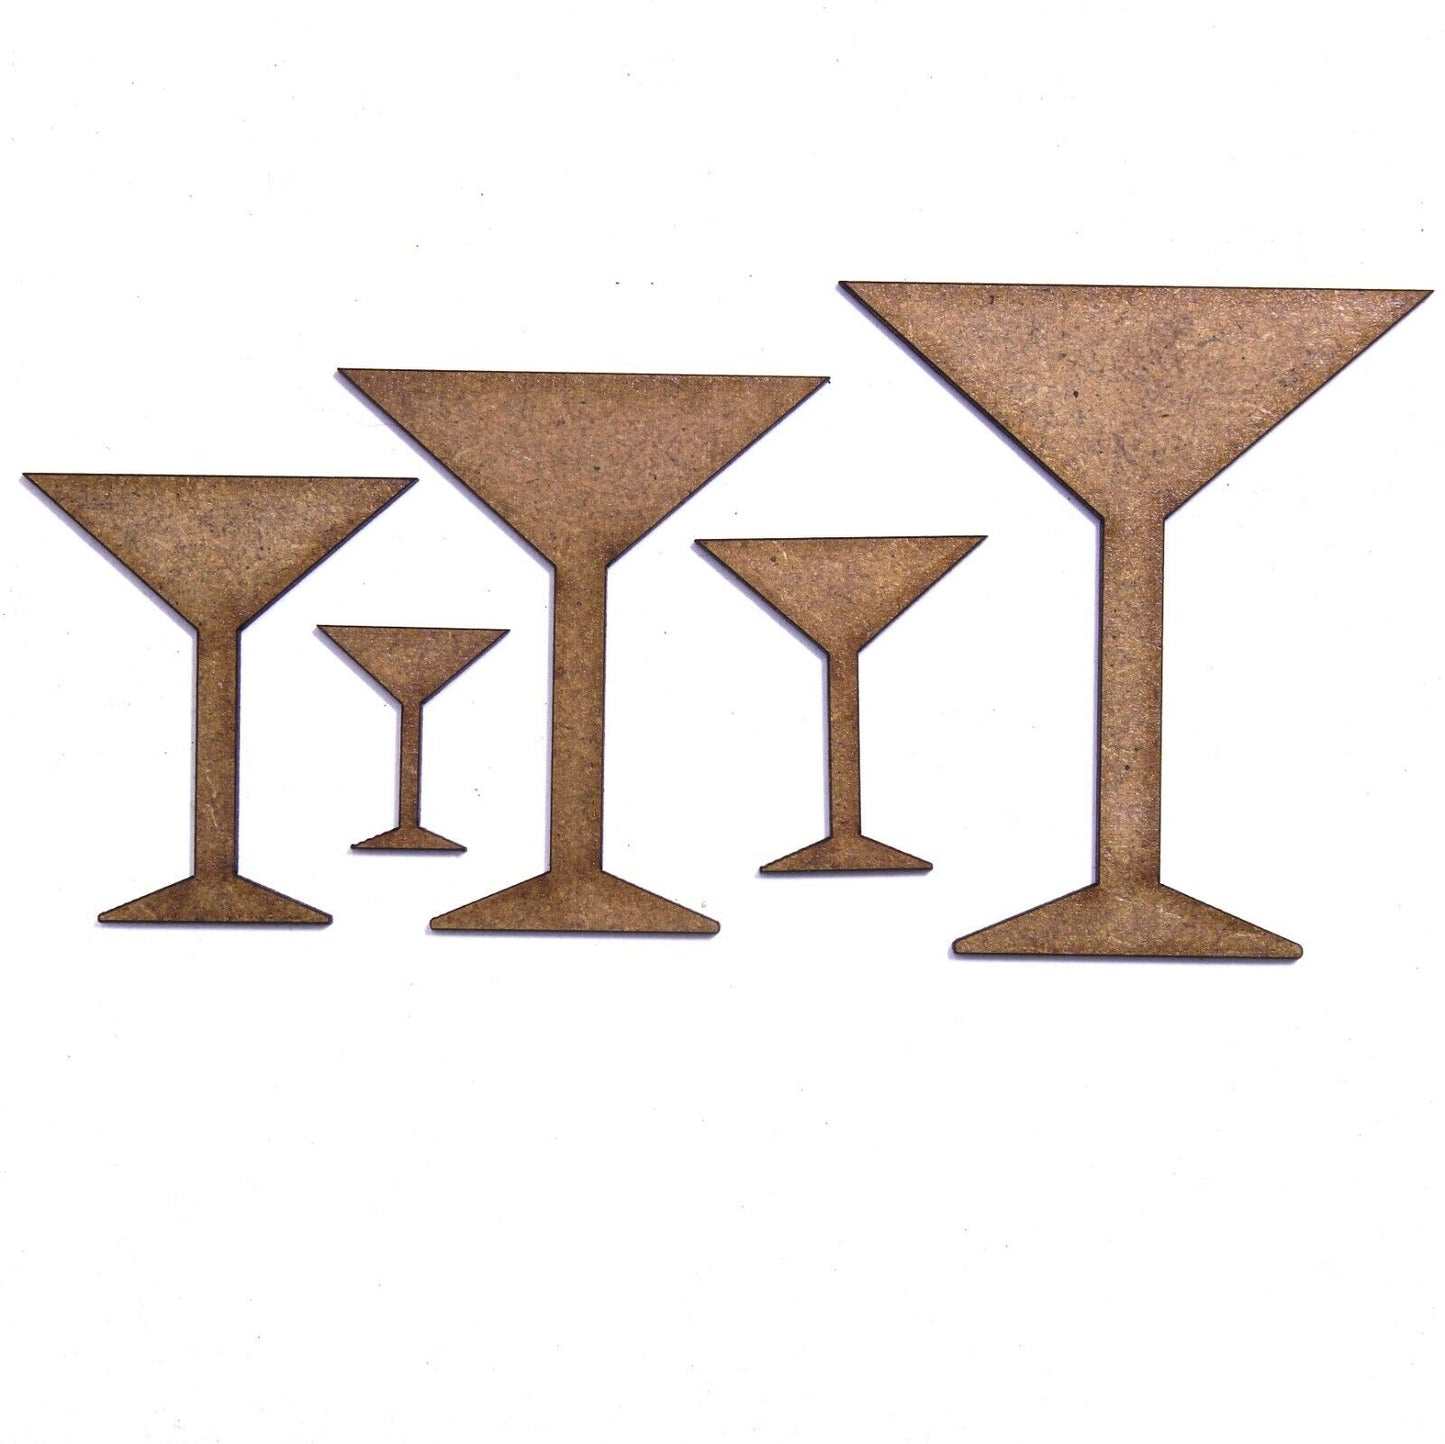 Cocktail Glass Craft Shape, Various Sizes, 2mm MDF Wood. Martini, Party